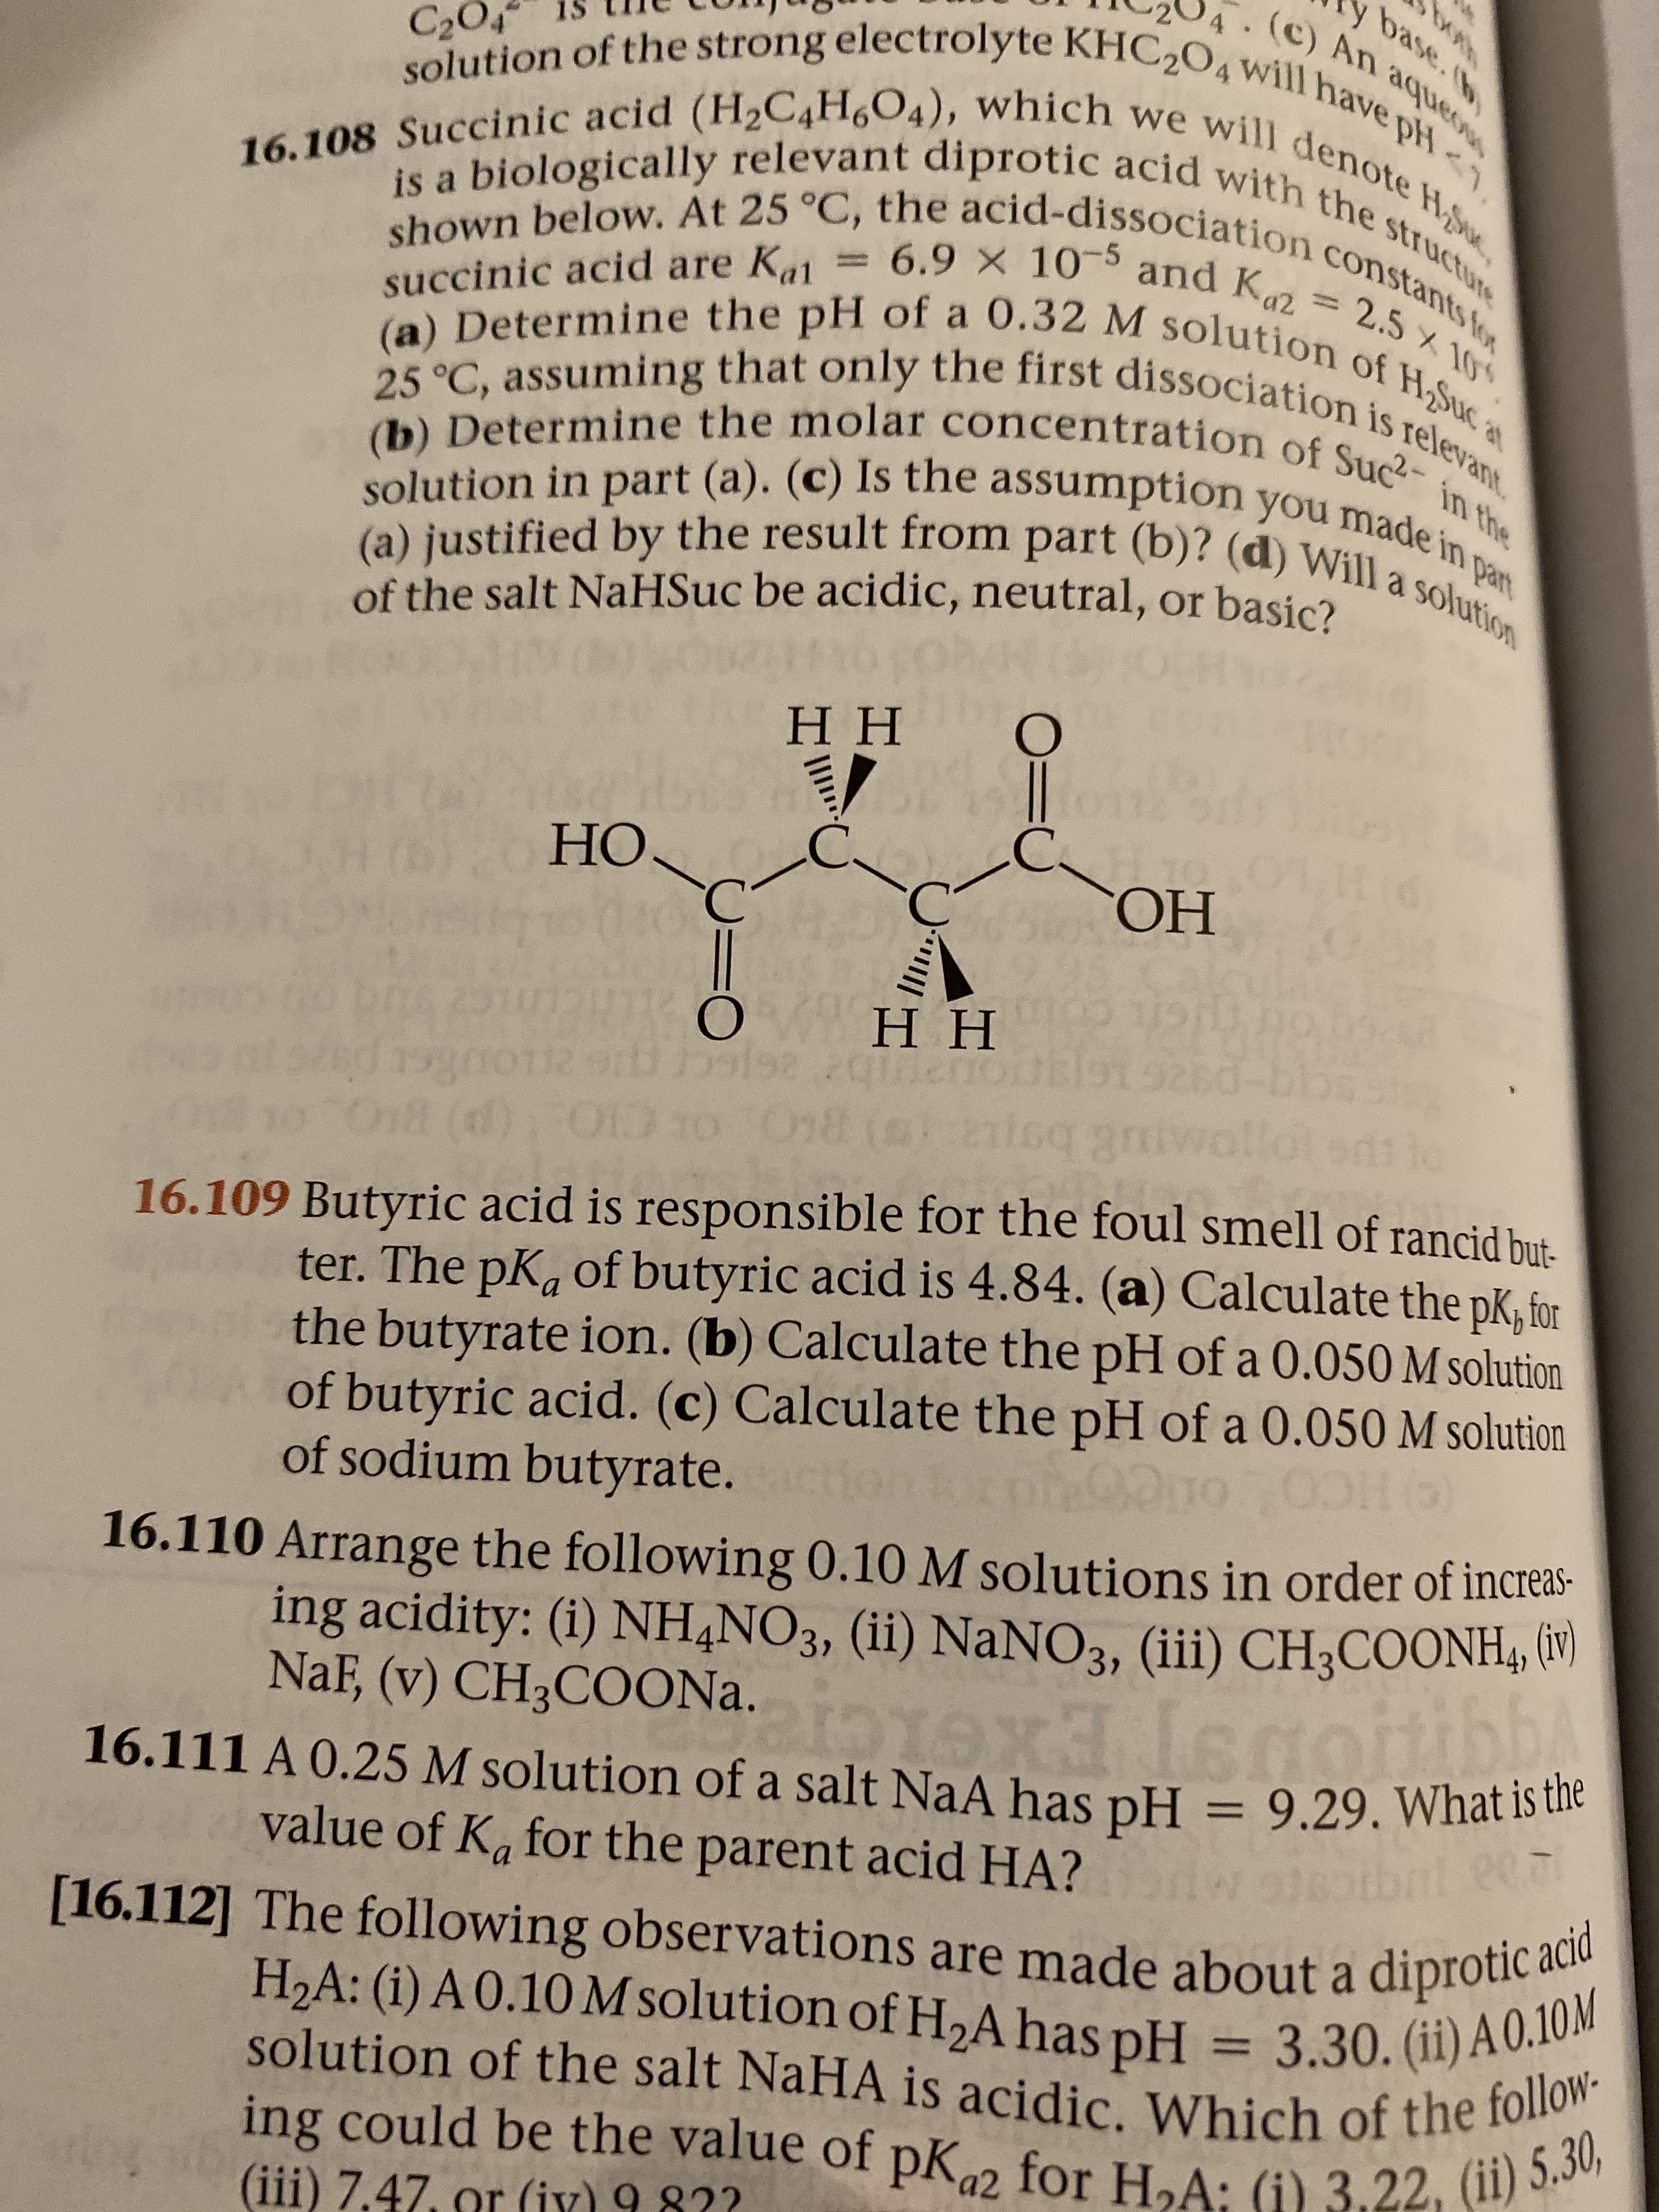 solution of the strong electrolyte KHC2O4 will have pHi,
base. (h,
An aqueous
C20,
16.108 Succinic acid (H2C4H6O4), which we will denote H
shown below. At 25 °C, the acid-dissociation constants for
is a biologically relevant diprotic acid with the structure
6.9 X 10-5 and Ka2
%3D
(a) Determine the pH of a 0.32 M solution of HSuc a
25 °C, assuming that only the first dissociation is relevant.
(b) Determine the molar concentration of Suc in the
solution in part (a). (c) Is the assumption you made in part
(a) justified by the result from part (b)? (d) Will a solution
succinic acid are K1
of the salt NaHSuc be acidic, neutral, or basic?
Н
НО.
C.
он
qiner
On8
llot
O18(d)
16.109 Butyric acid is responsible for the foul smell of rancid but.
ter. The pK, of butyric acid is 4.84. (a) Calculate the pK, for
the butyrate ion. (b) Calculate the pH of a 0.050 M solution
of butyric acid. (c) Calculate the pH of a 0.050 M solution
of sodium butyrate.
16.110 Arrange the following 0.10 M solutions in order of increas-
ing acidity: (i) NH,NO3, (ii) NaNO3, (iii) CH3COONH, (V)
NaF, (v) CH3COONA.
toitibbA
16.111 A 0.25 M solution of a salt NaA has pH = 9,29. What is the
ibnl 20.7
value of K, for the parent acid HA?
[16.112] The following observations are made about a diprotic acid
H2A: (i) A 0.10 M solution of H2A has pH = 3.30. (ii) A 0.10M
solution of the salt NaHA is acidic. Which of the follow-
ing could be the value of pK2 for H,A; (i) 3,22, (ii) 5.30,
(iii) 7.47, or (iy) 9 82?
